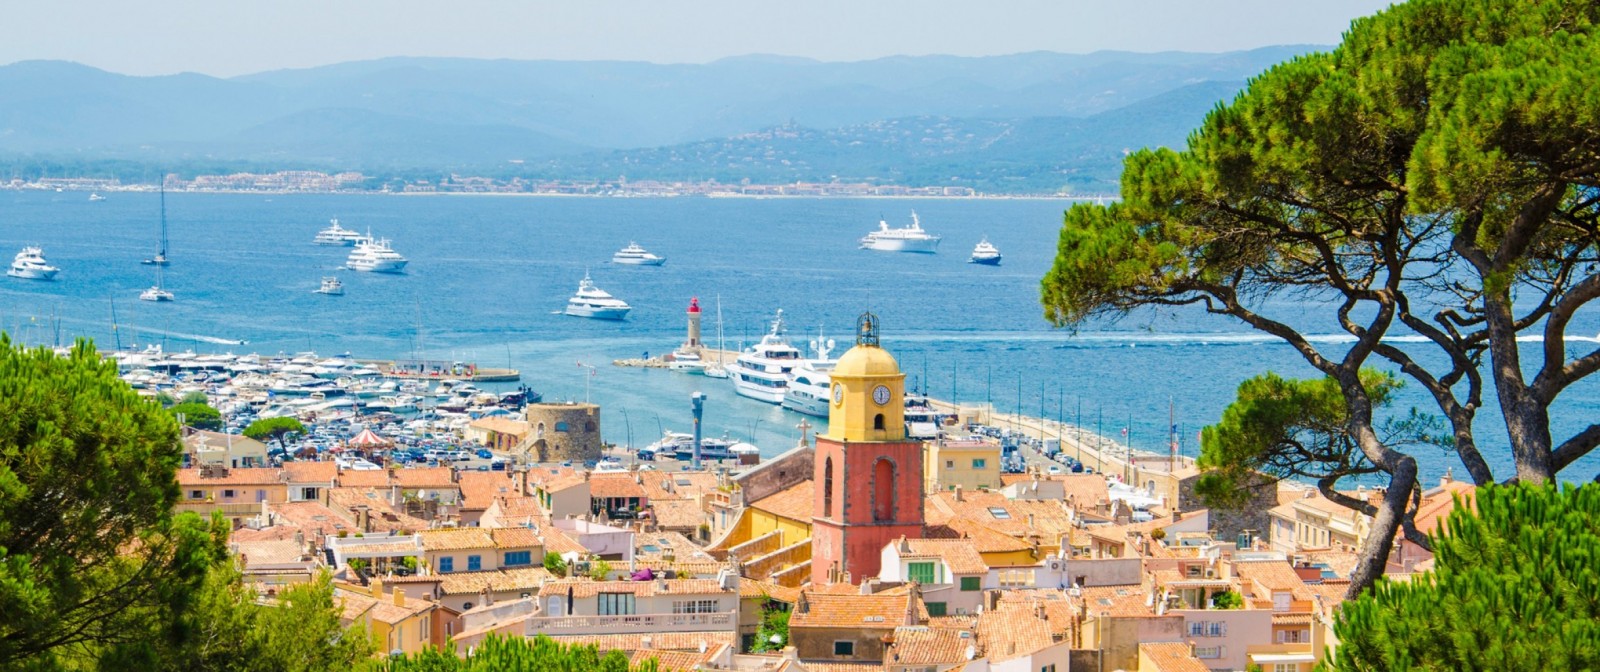 Private Chauffeur for CANNESERIES Festival in Cannes - Premium Vehicles & Services - Reactivity 24/7 - Ruby Services - Car Rental with Driver for CANNESERIES Festival in Cannes